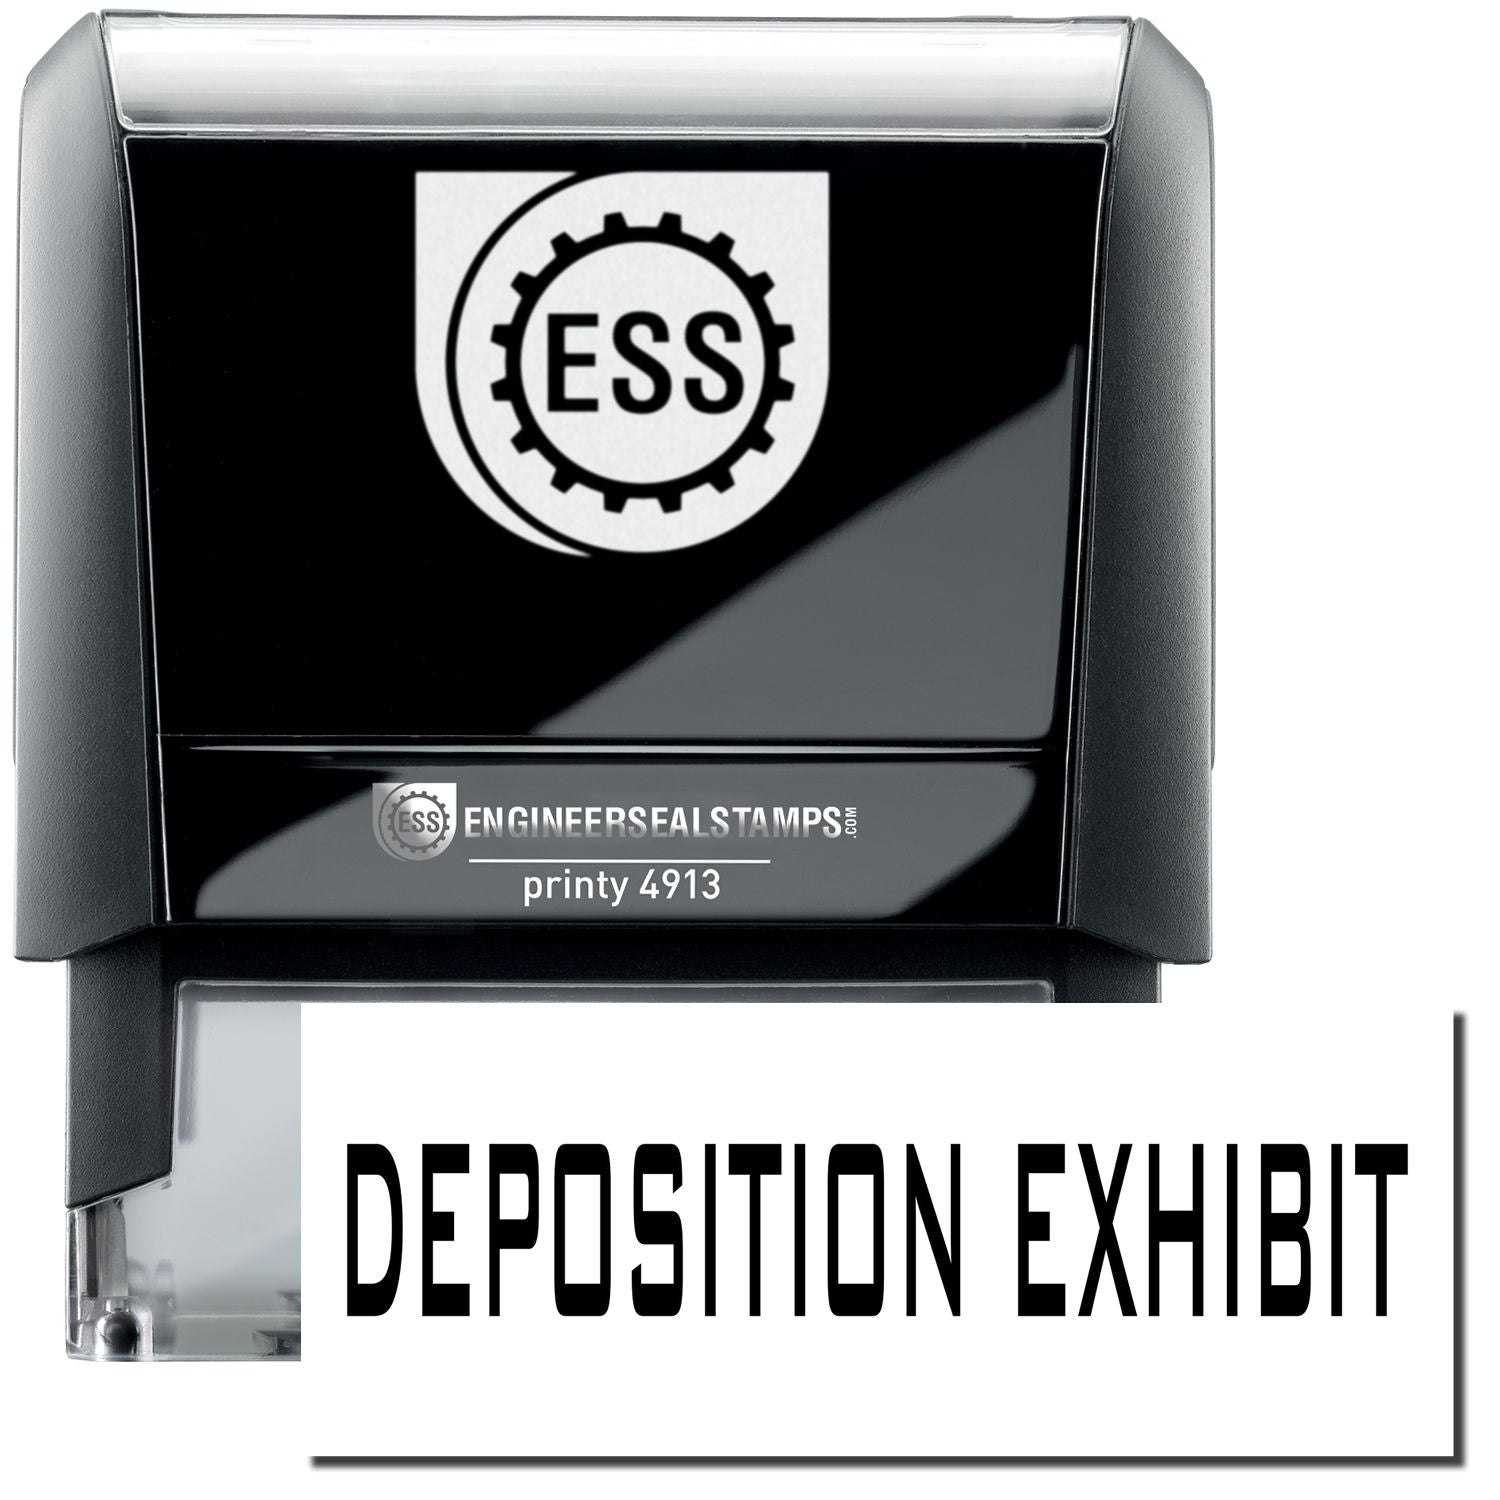 A self-inking stamp with a stamped image showing how the text "DEPOSITION EXHIBIT" in a large bold font is displayed by it.